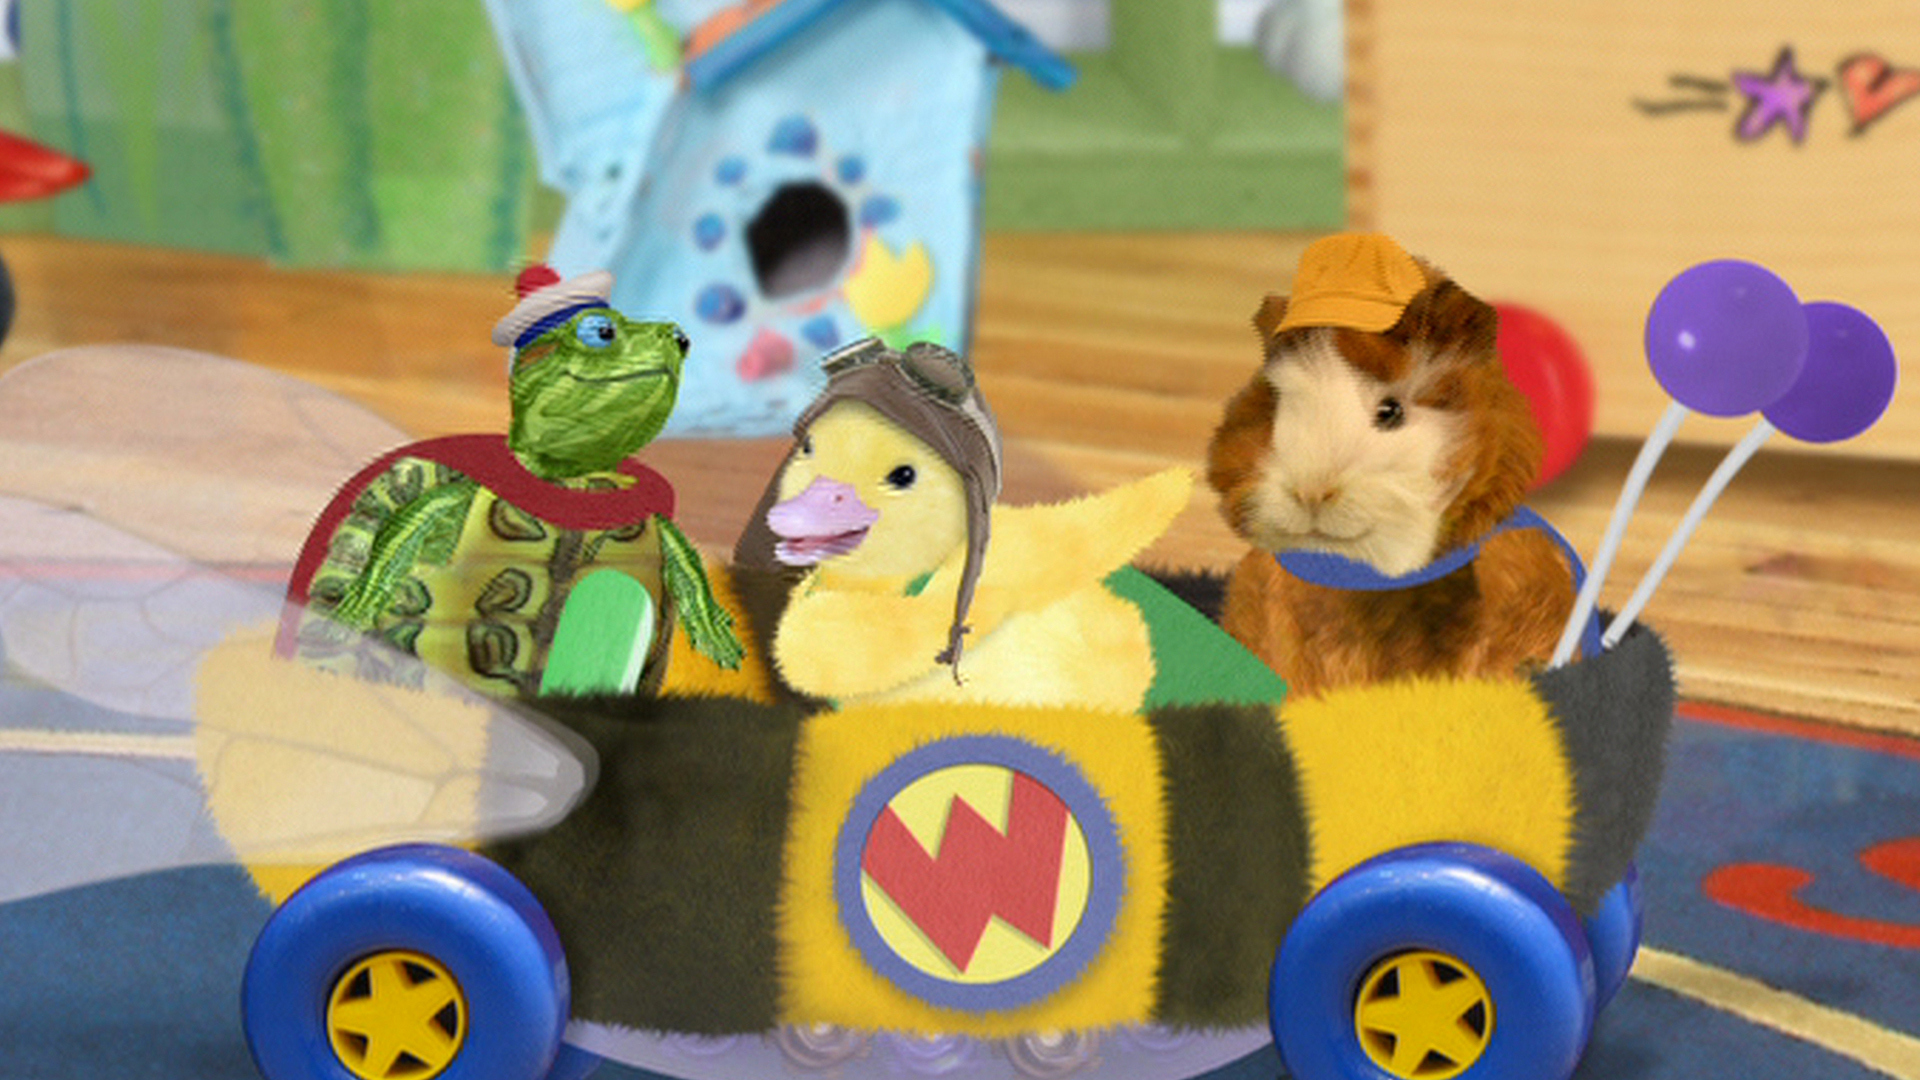 Watch Wonder Pets Season 2 Episode 6: Save the Bee!/Save the Squirrel